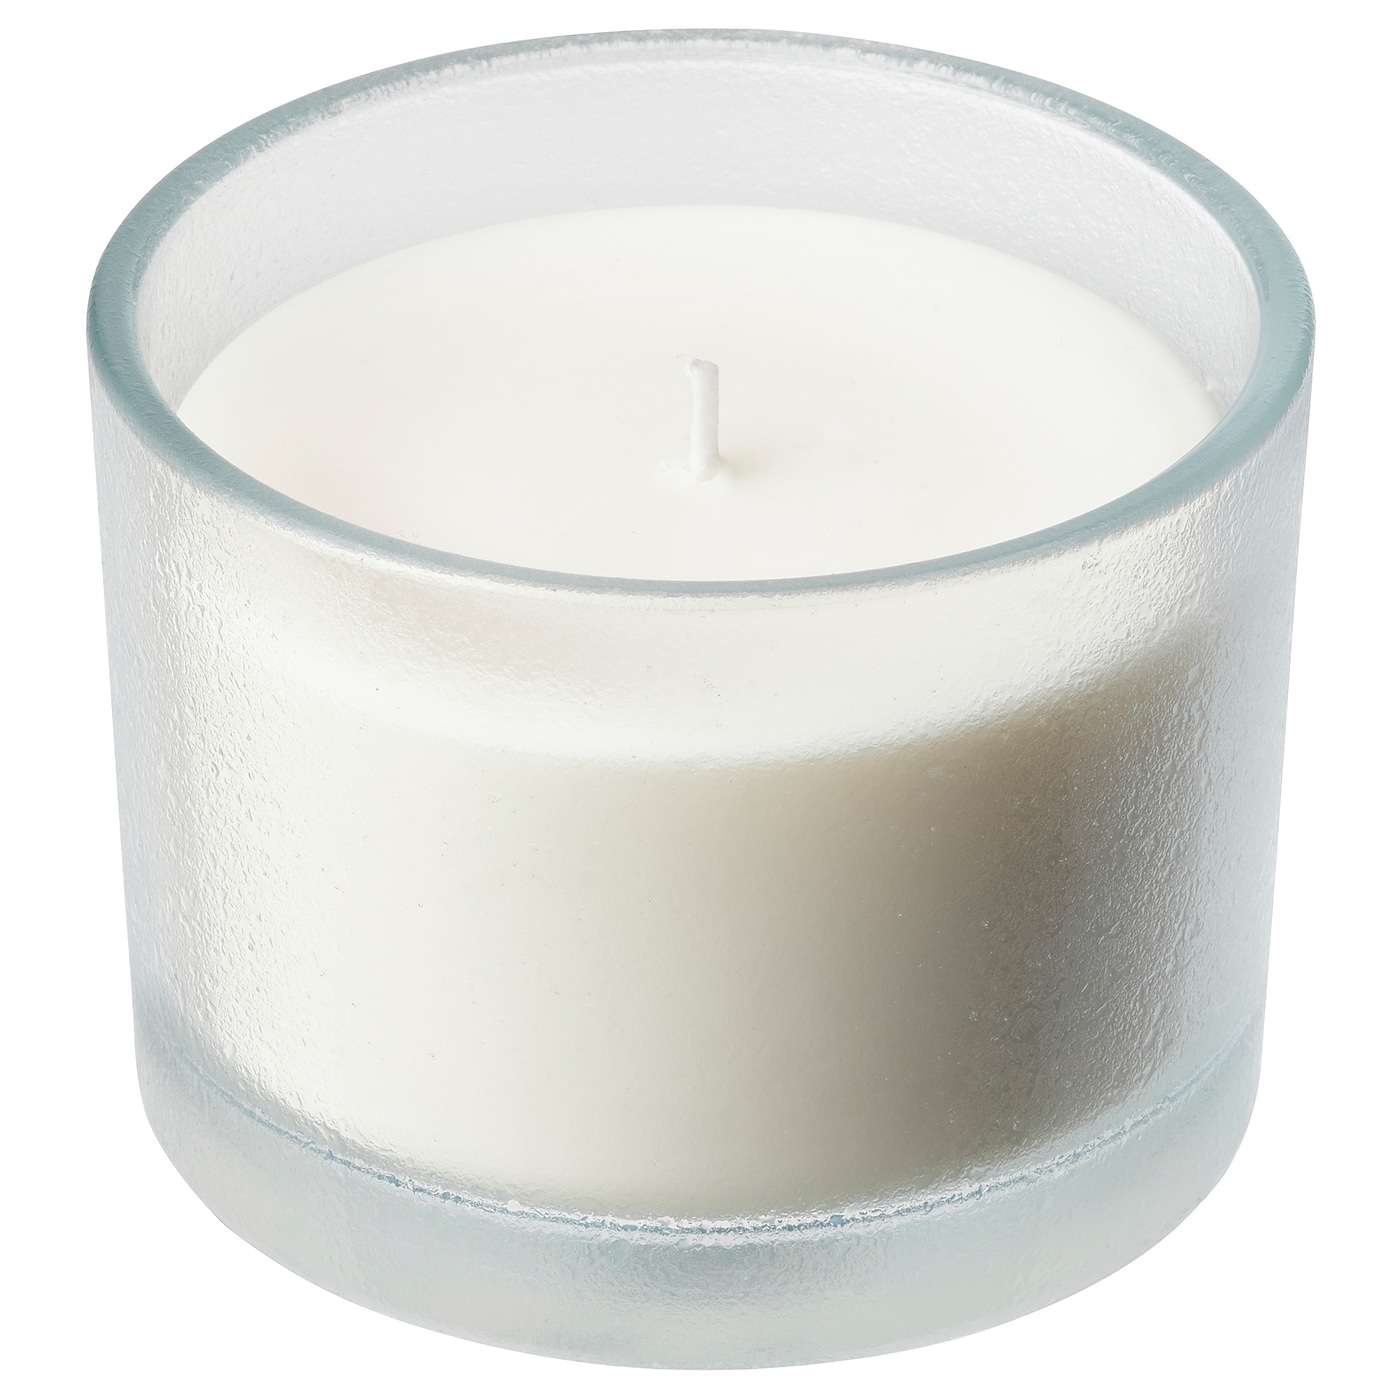 adlad-scented-candle-in-glass-scandinavian-woods-white__1060255_pe849864_s5